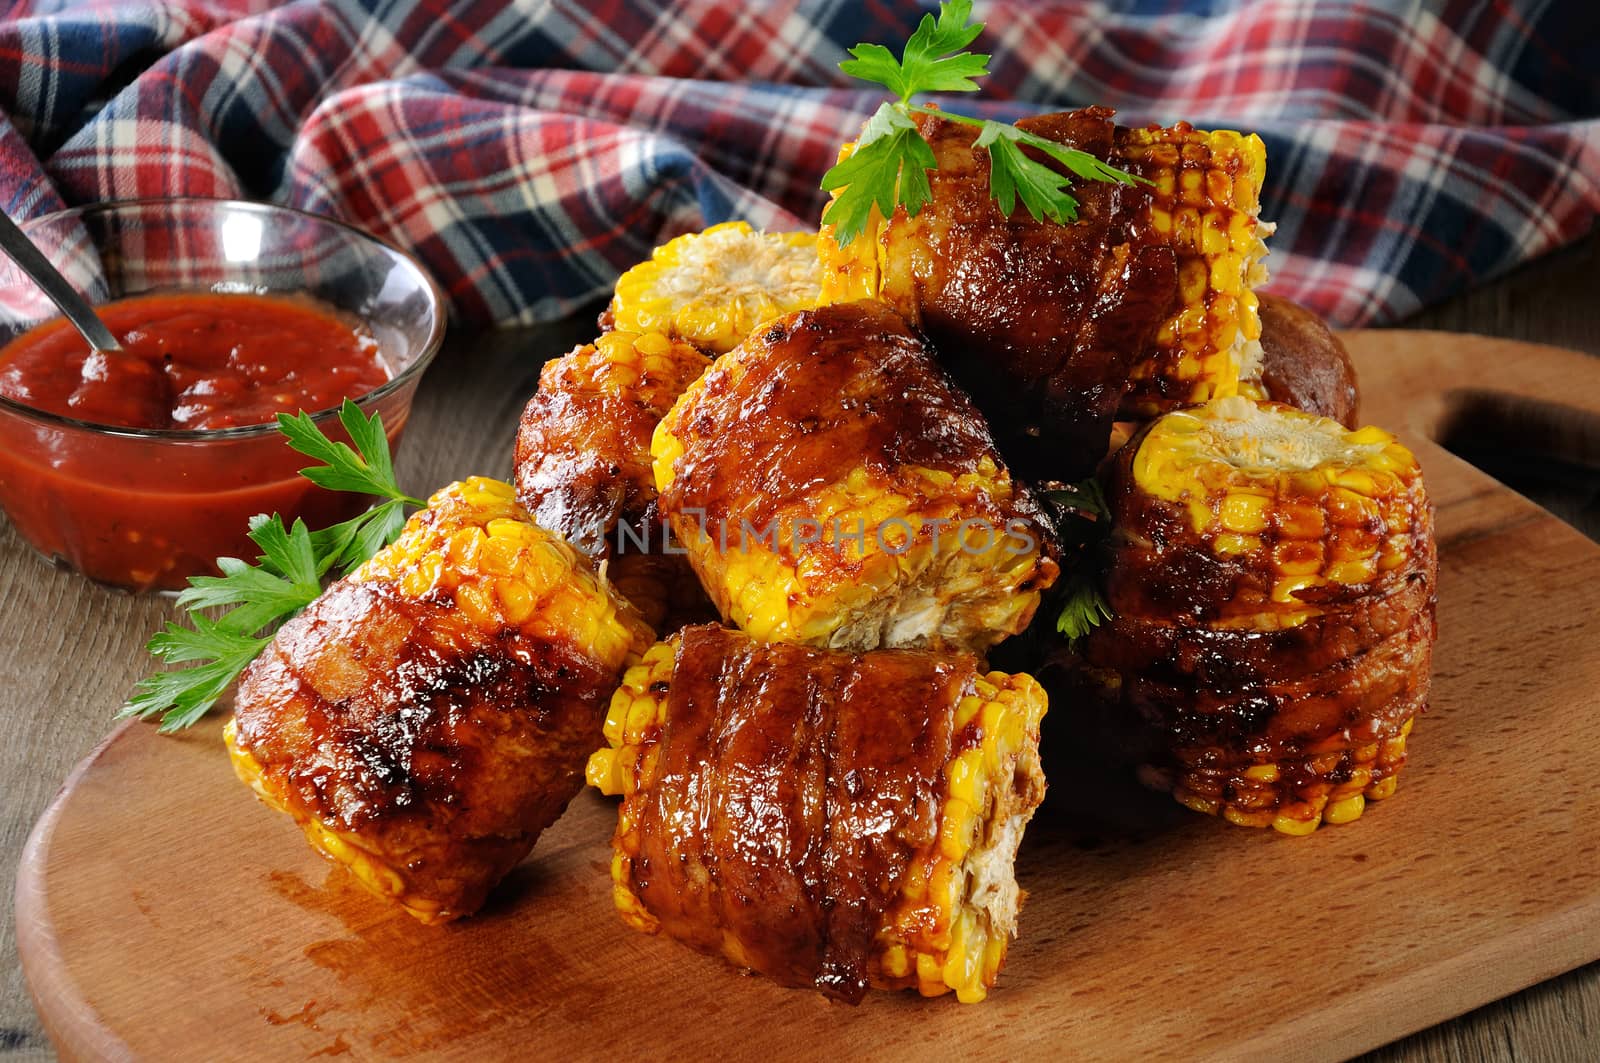 Grilled corn wrapped in bacon by Apolonia